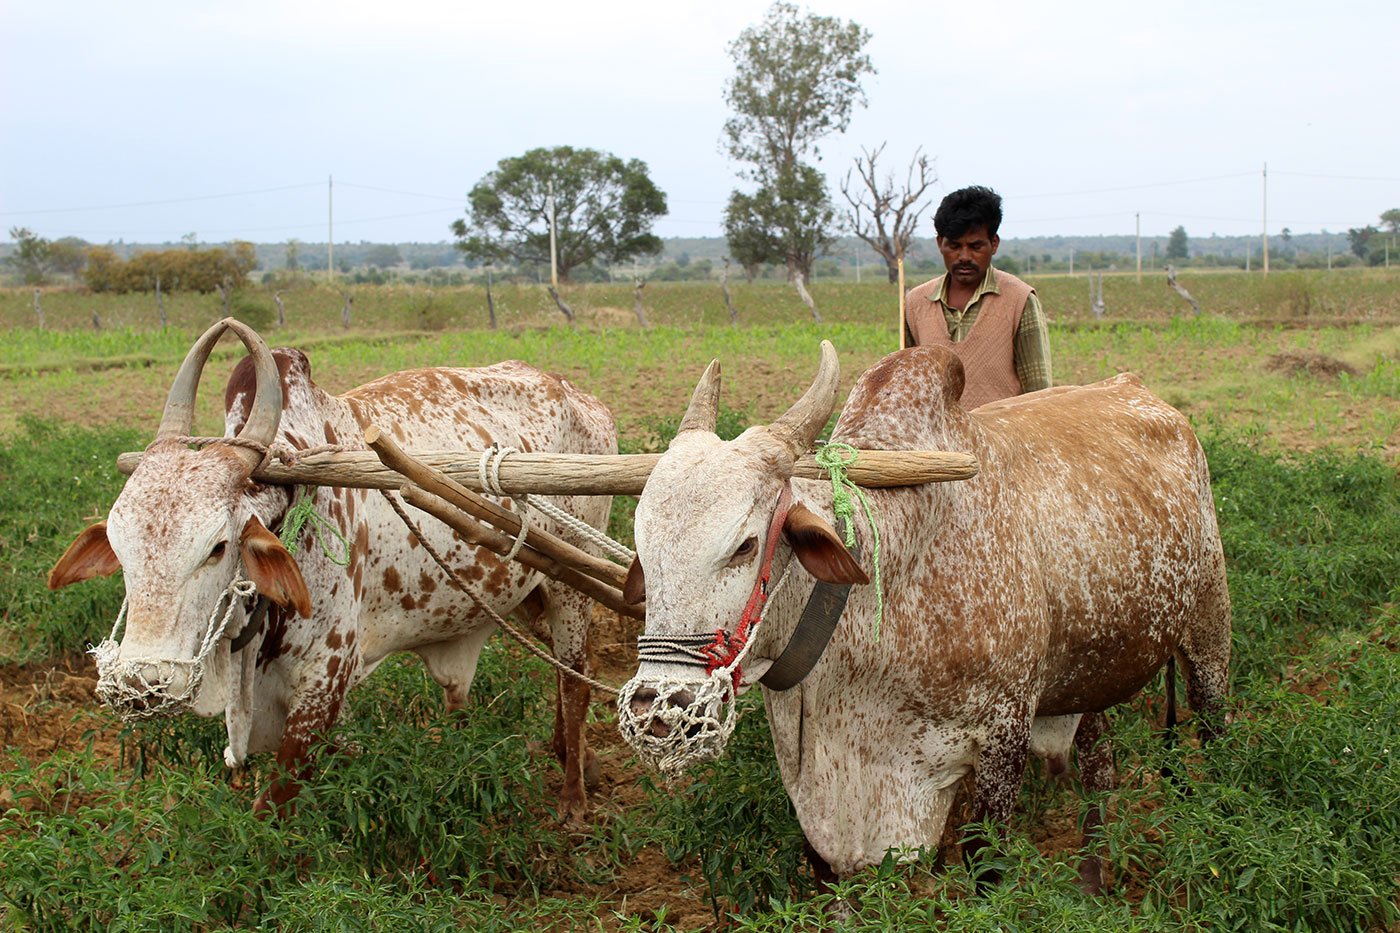 Man using his cattle for work